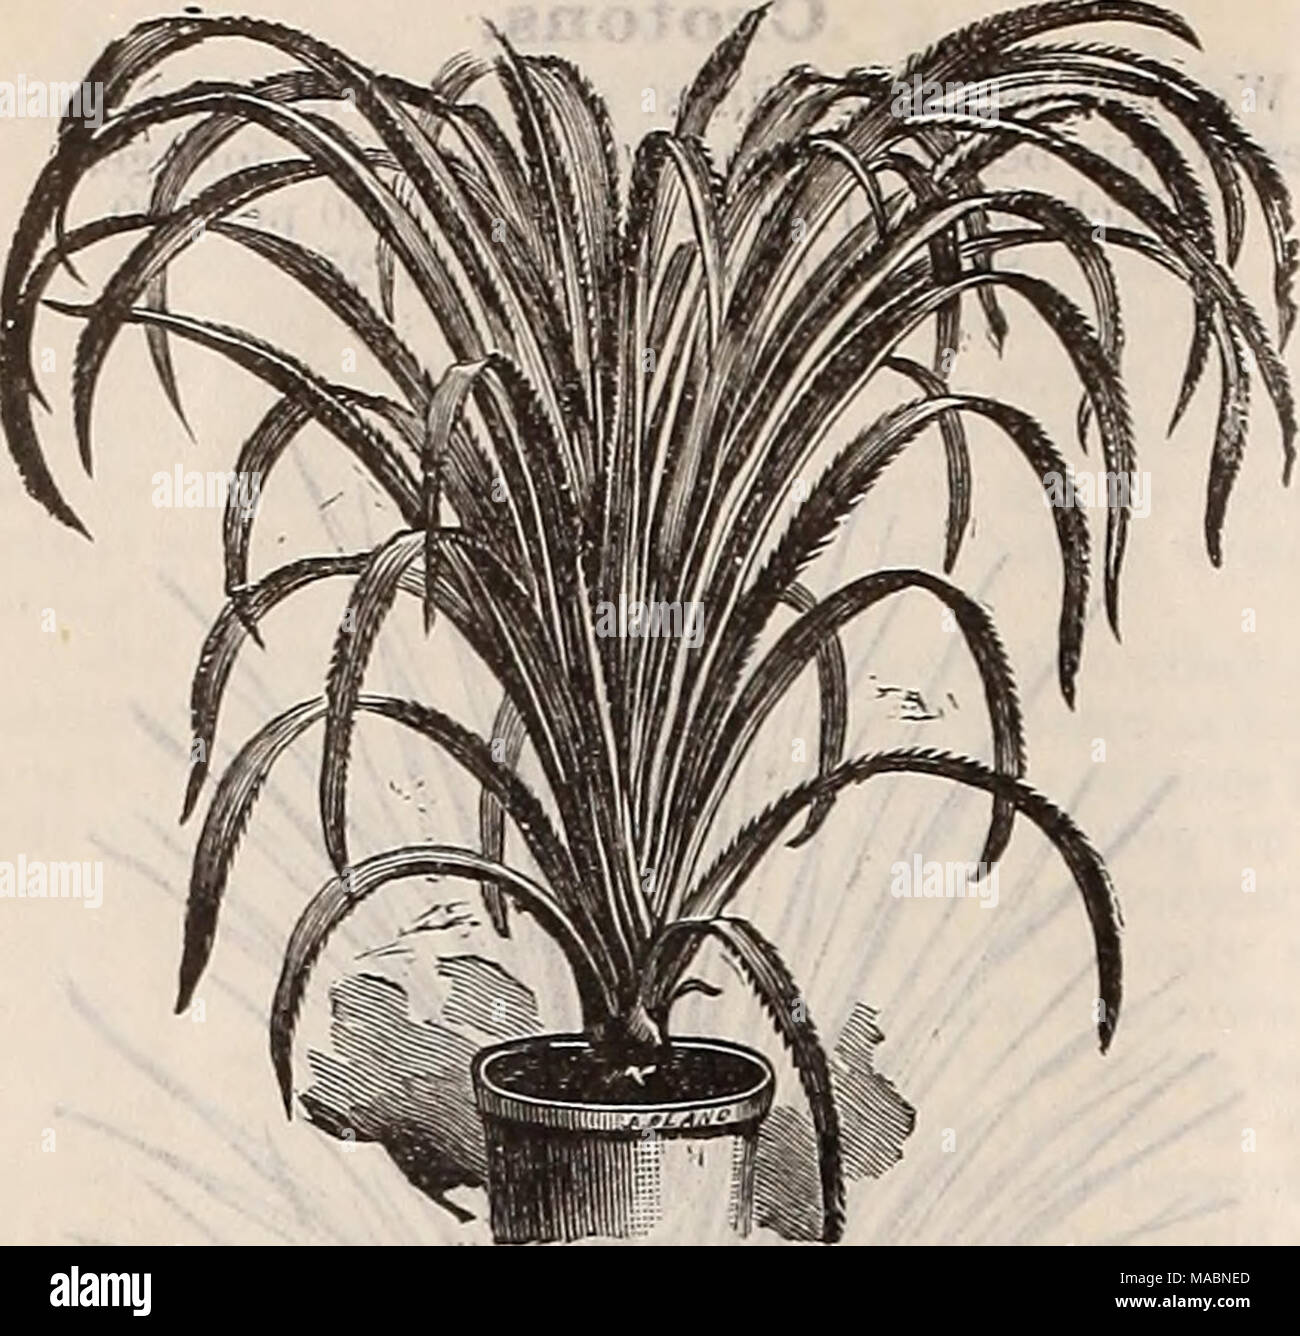 . Dreer's quarterly wholesale price list of seeds, plants, bulbs, &amp;c. : summer edition July 1895 August . Pa.ndanus Utius. Pandanns Utilis. A fine lot in 2} inch pots, 75 cts. per doz.; $6.00 per 100 ; $50.00 per 1000. Pitcher Plants—Nepenthes. We offer 6 choice varieties of these interesting plants, growing in 6 inch square cedar baskets. Price, $1.50 each. Sclmbertia Grandiflora. An exceedingly pretty climber, -which succeeds admirably in the open ground during the summer months, producing clusters of large funnel-shaped fleshy-white flowers of delightful fragrance, not unlike Stephanoti Stock Photo